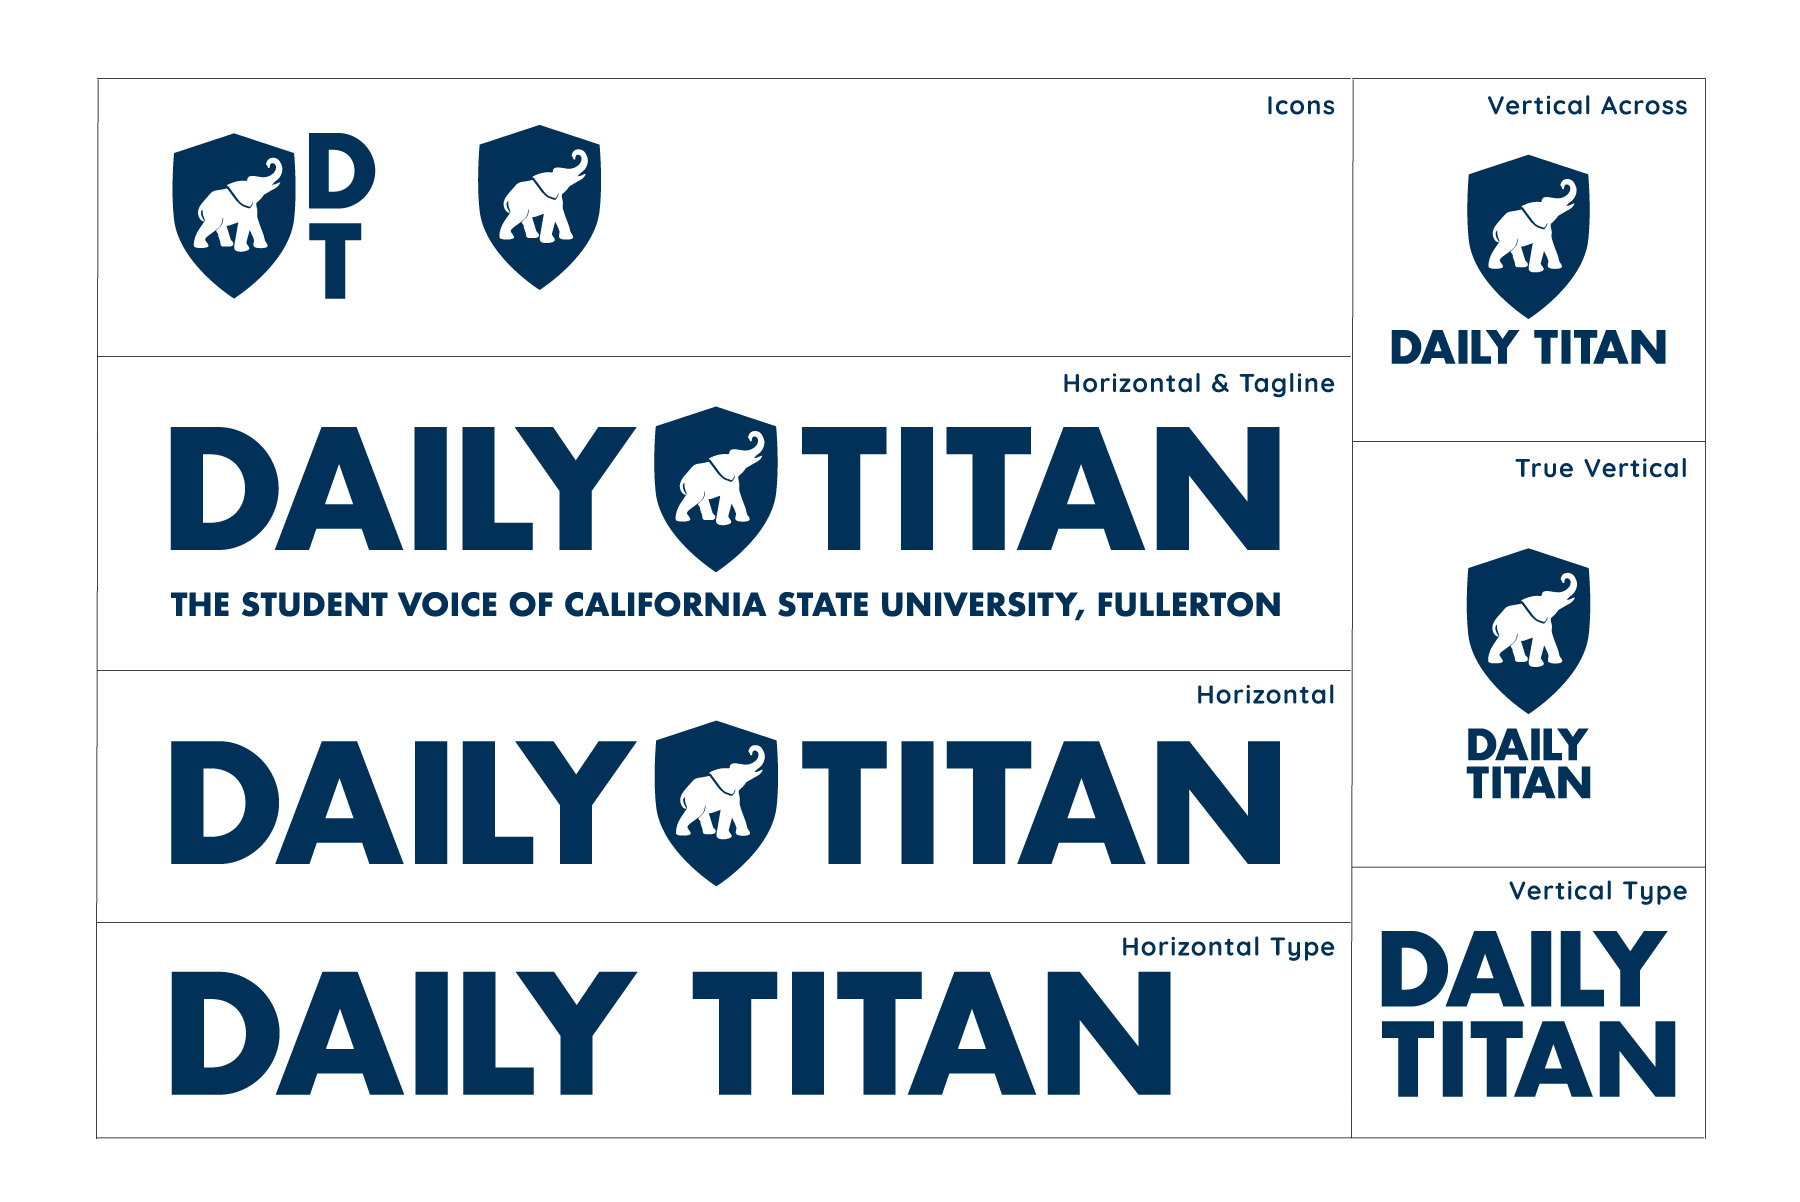 Table showing eight different Daily Titan logo variations.